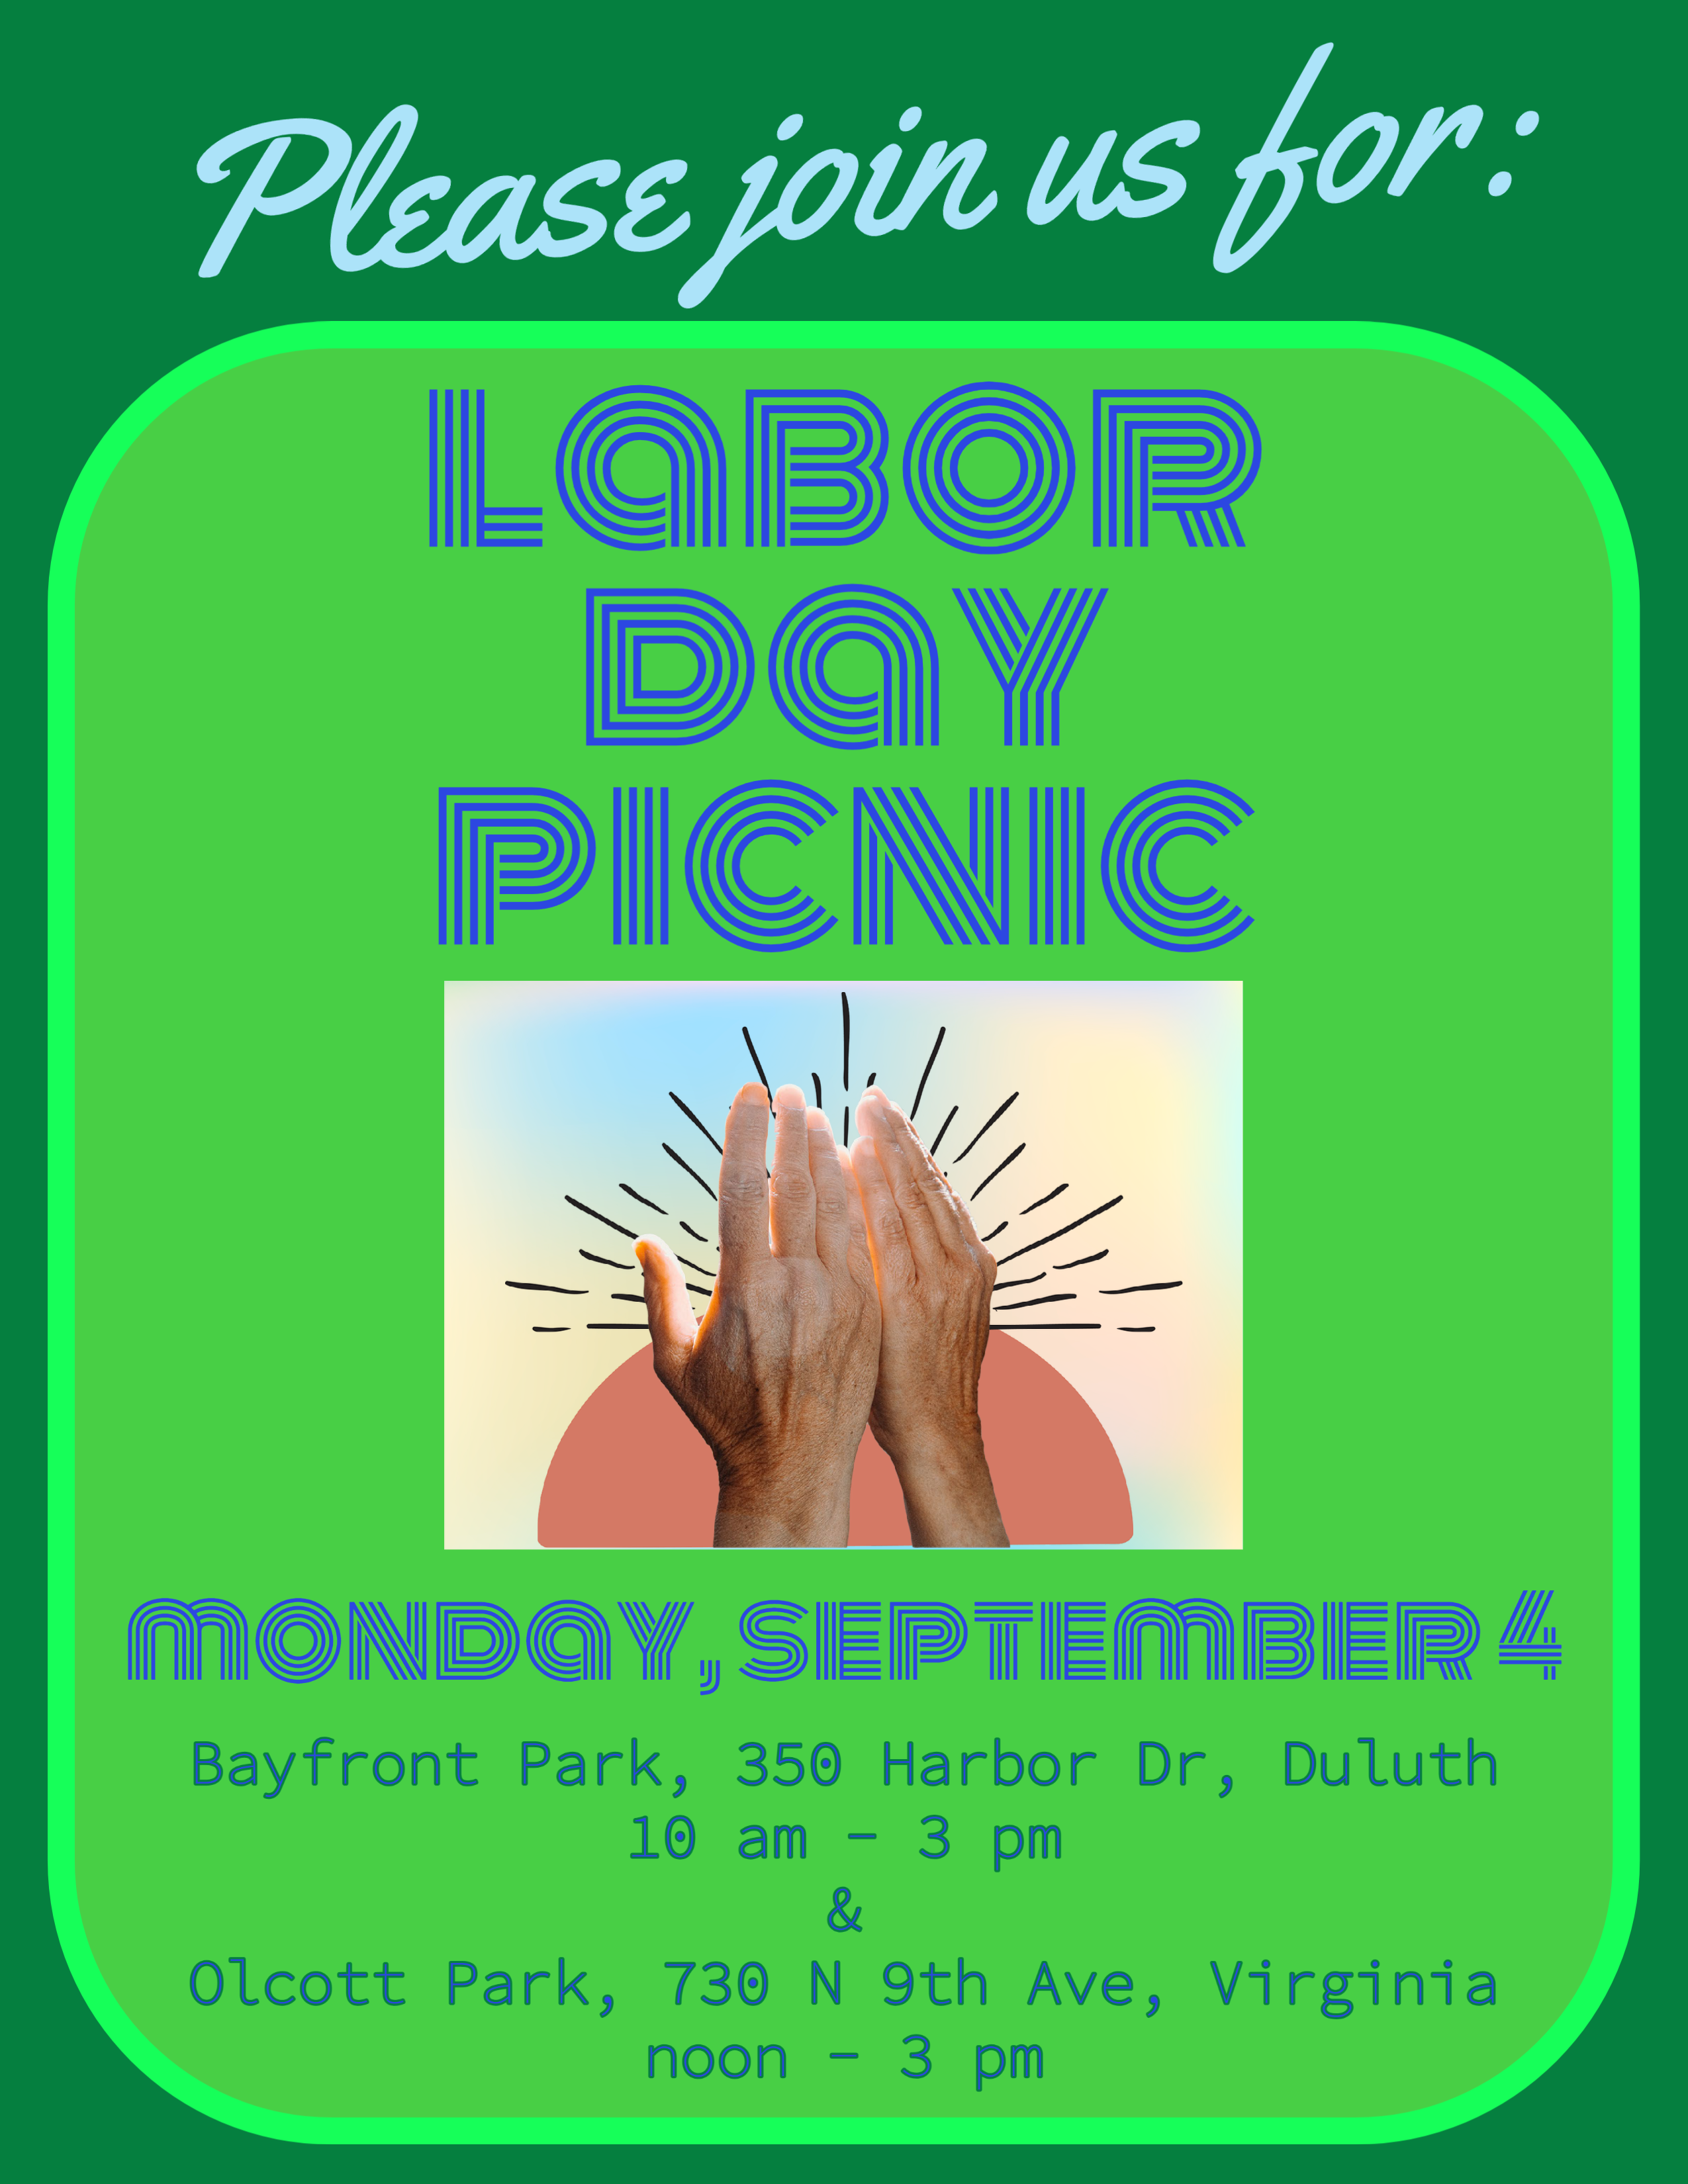 Please join us for: Labor Day Picnic, Monday, September 4, Bayfront Park, 350 Harbor Dr, Duluth 10 am - 3 pm & Olcott Park, 730 N 9th Ave, Virginia noon - 3 pm. Shows graphic of hands reaching upwards. 